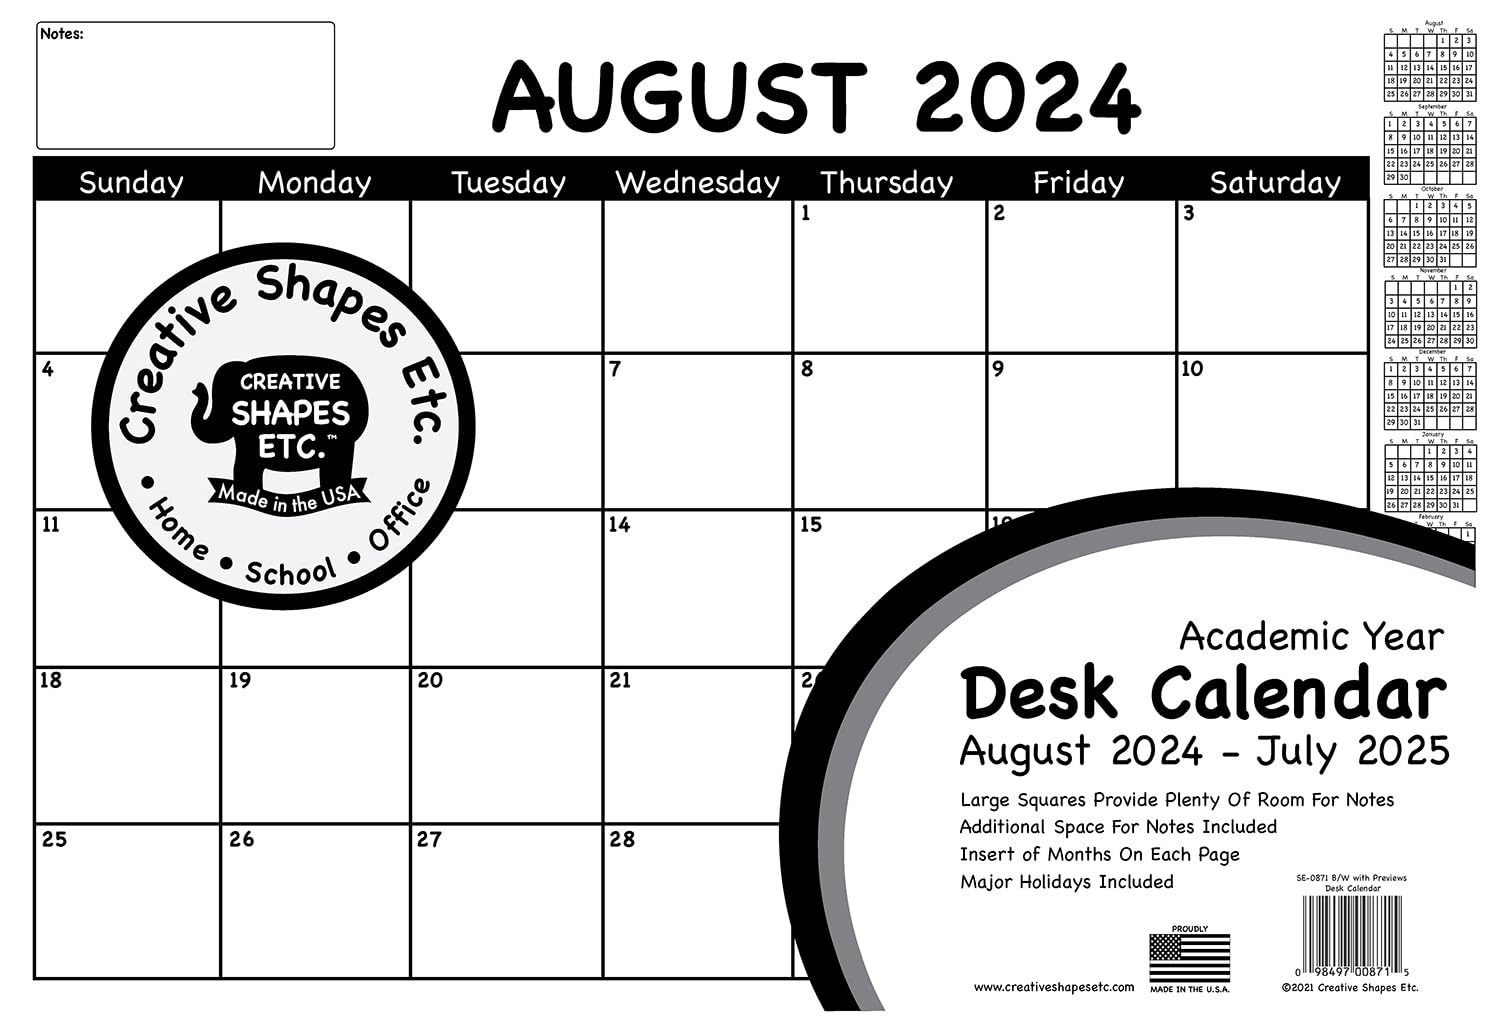 2 pcs 2024-2025 Academic Year Desk Calendar Black/White and Chalkboard Design Combination Pack, 12 months with notes space major holidays 13” x 19” Wall/Desk Teacher Planner Classroom Office Home Organization